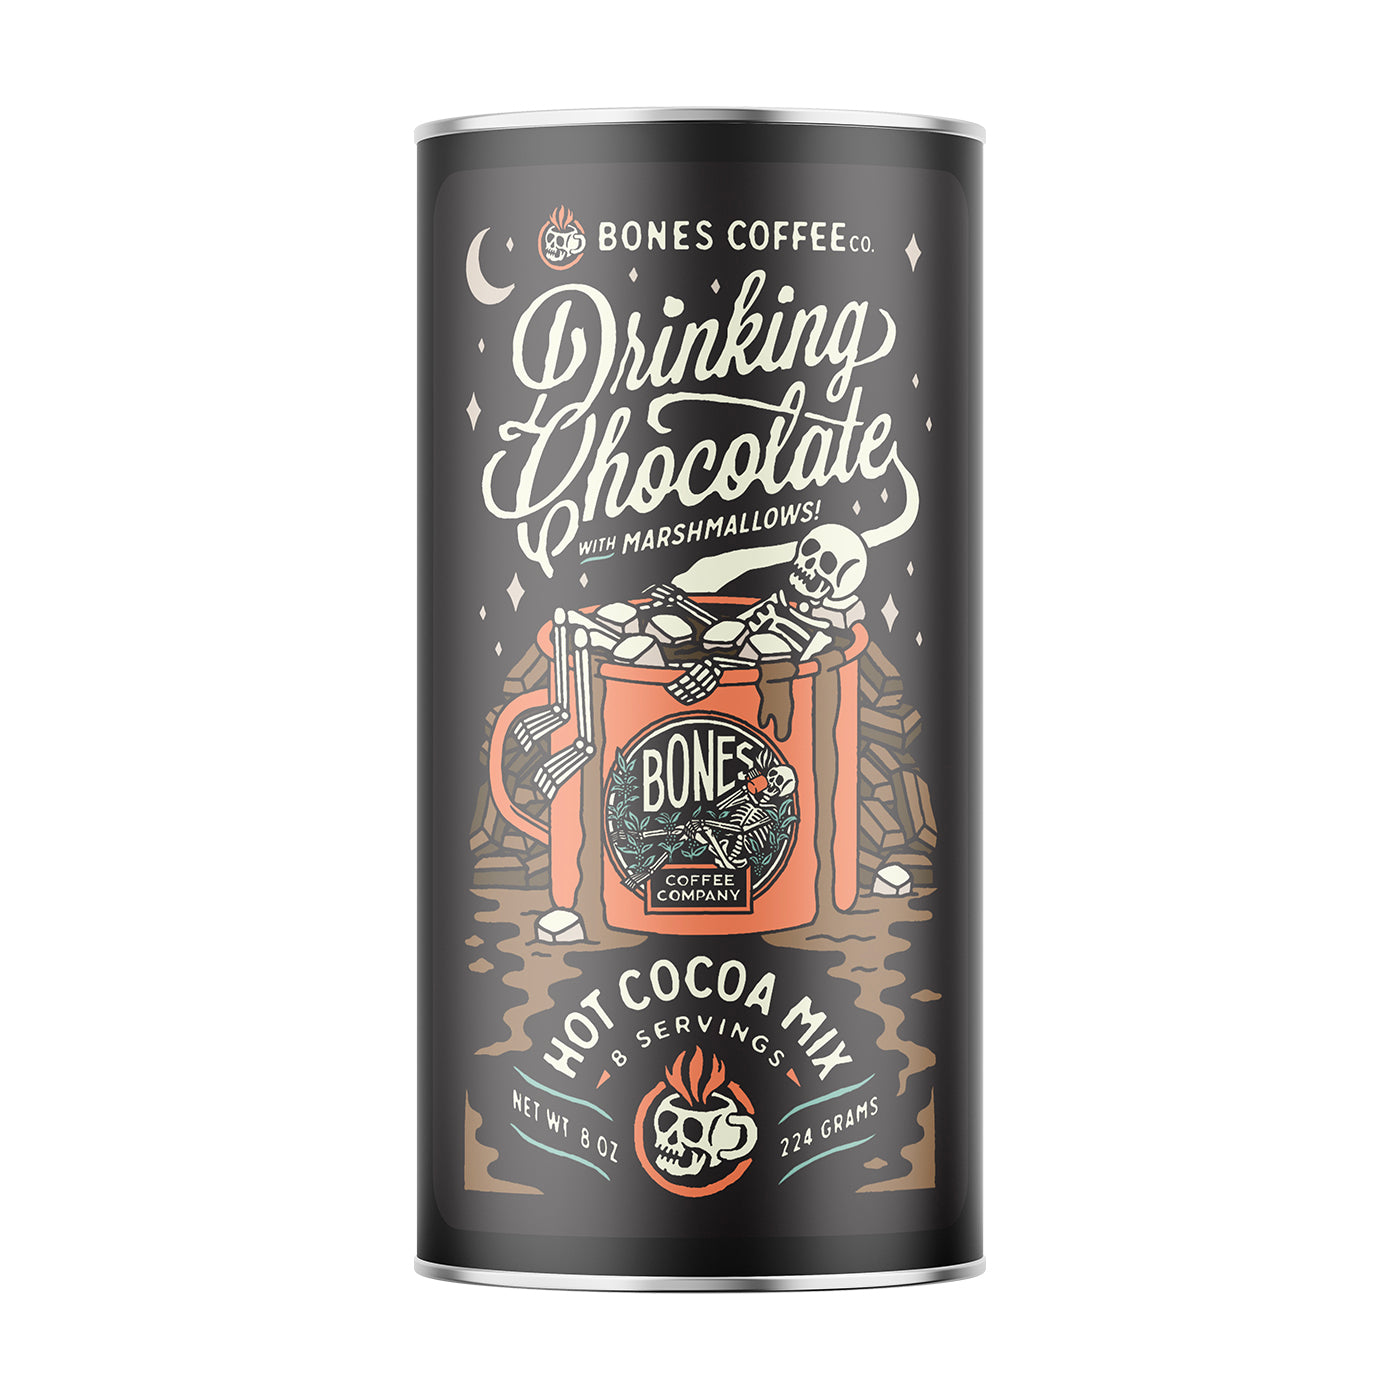 A tin of drinking chocolate mix that has marshmallows in it. The art shows a skeleton lounging in a mug full of hot chocolate and marshmallows.